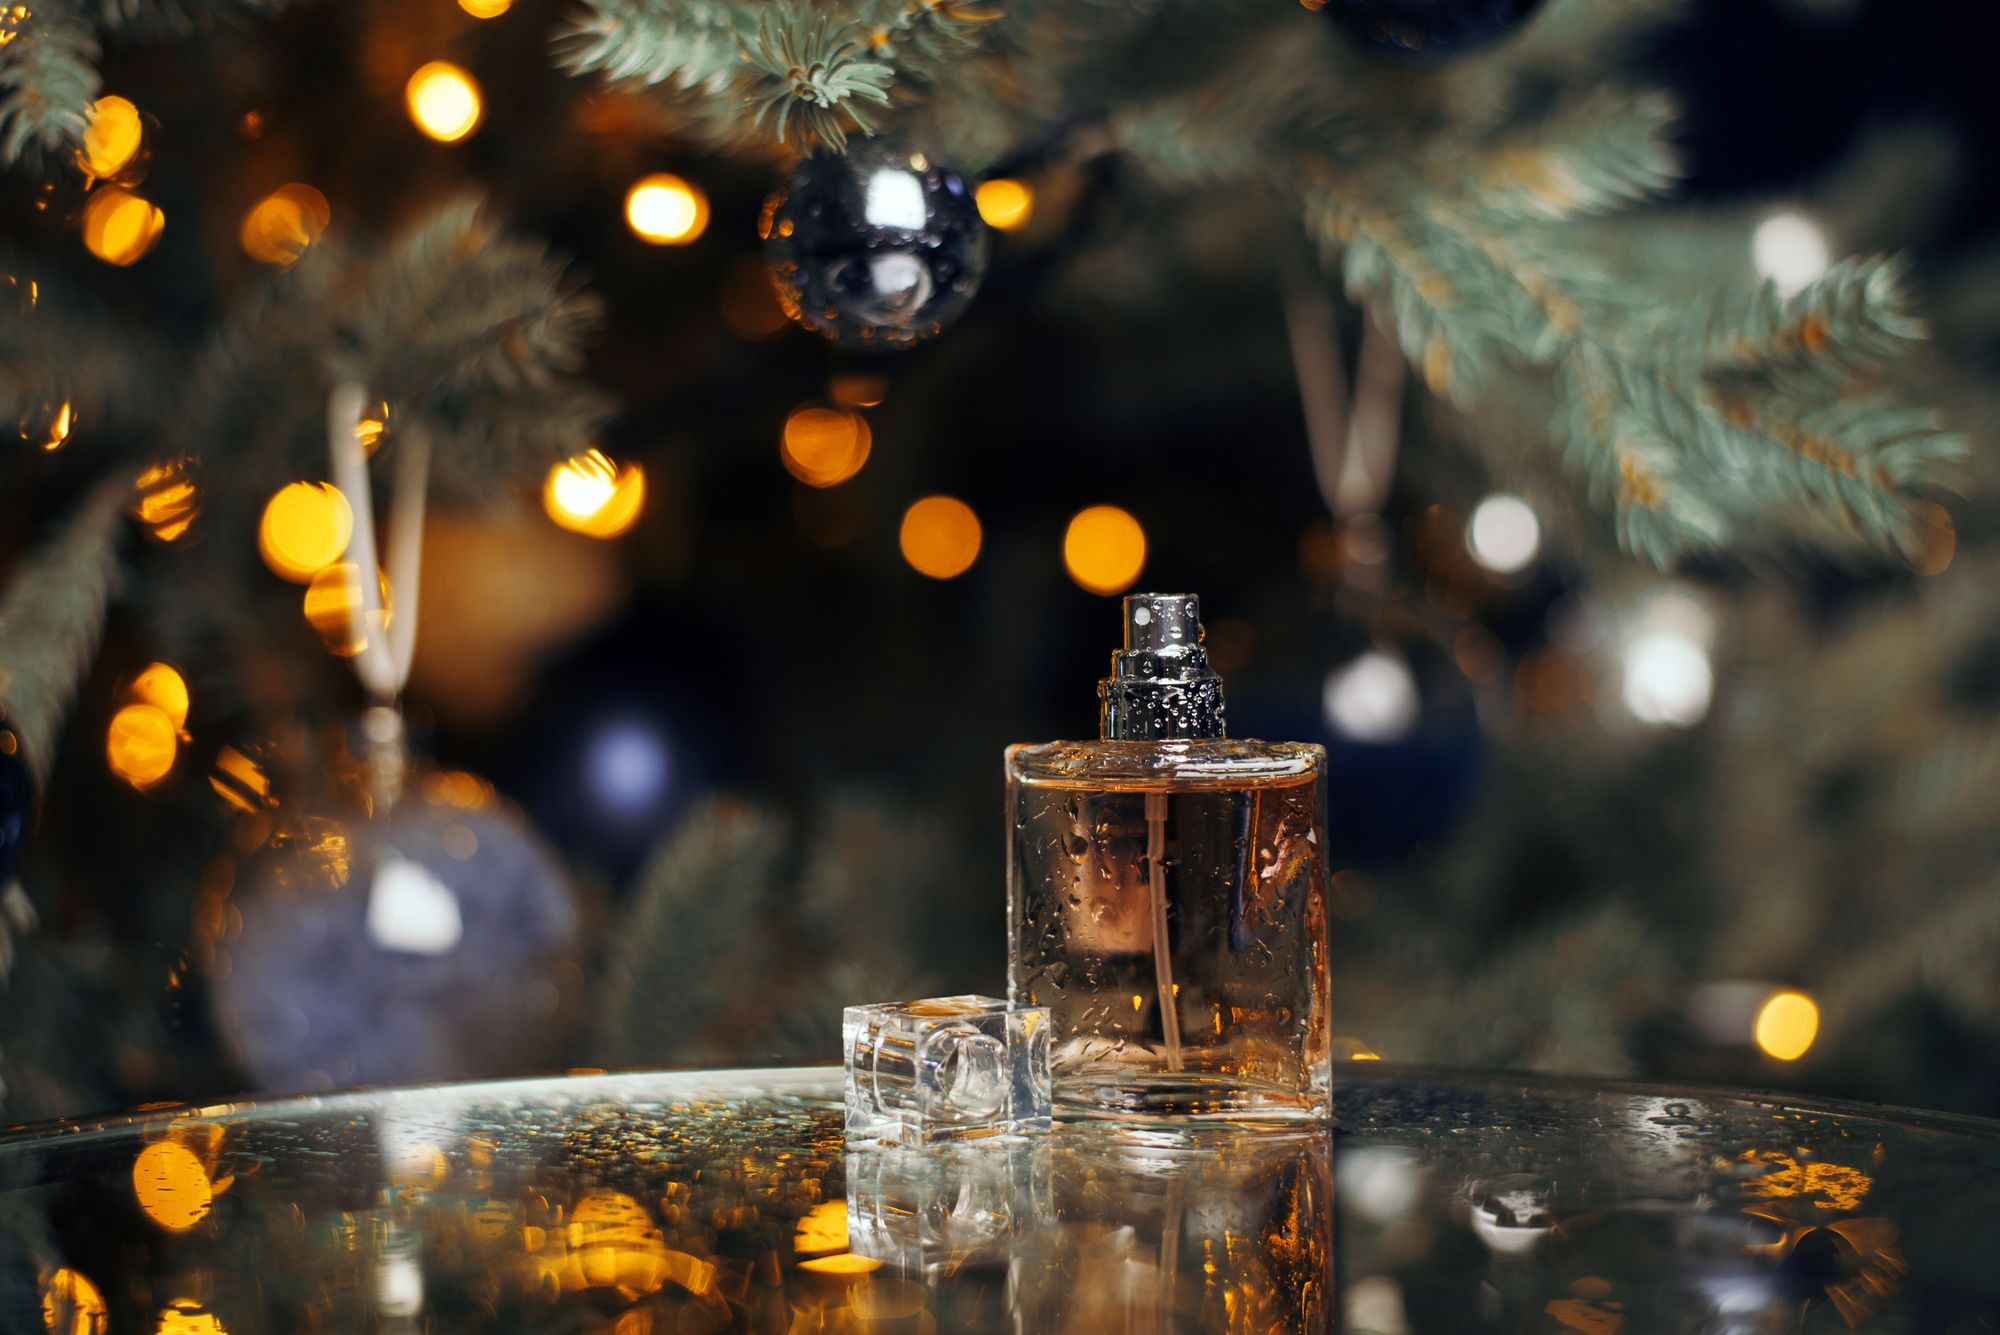 Dreamy Scents That Will Have Everyone Enchanted This Christmas